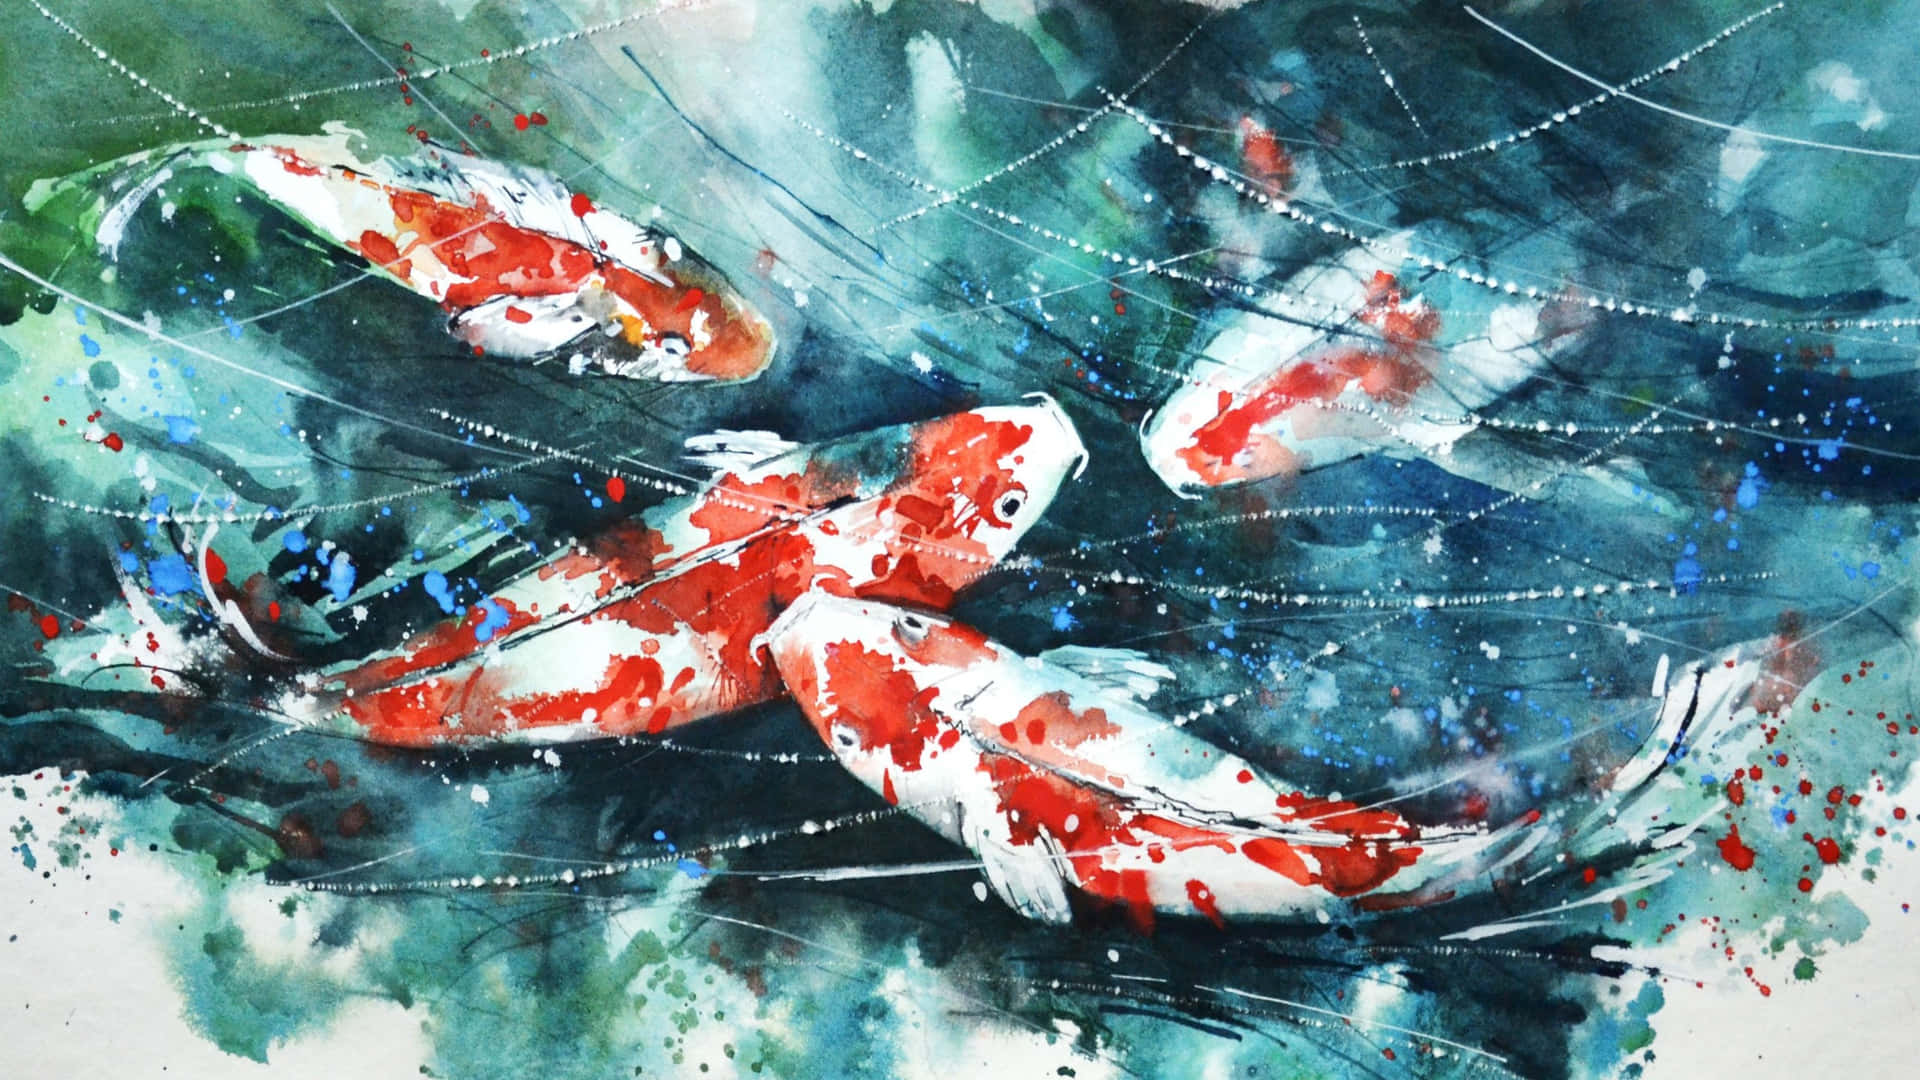 Live Koi Fish In A Painting Wallpaper